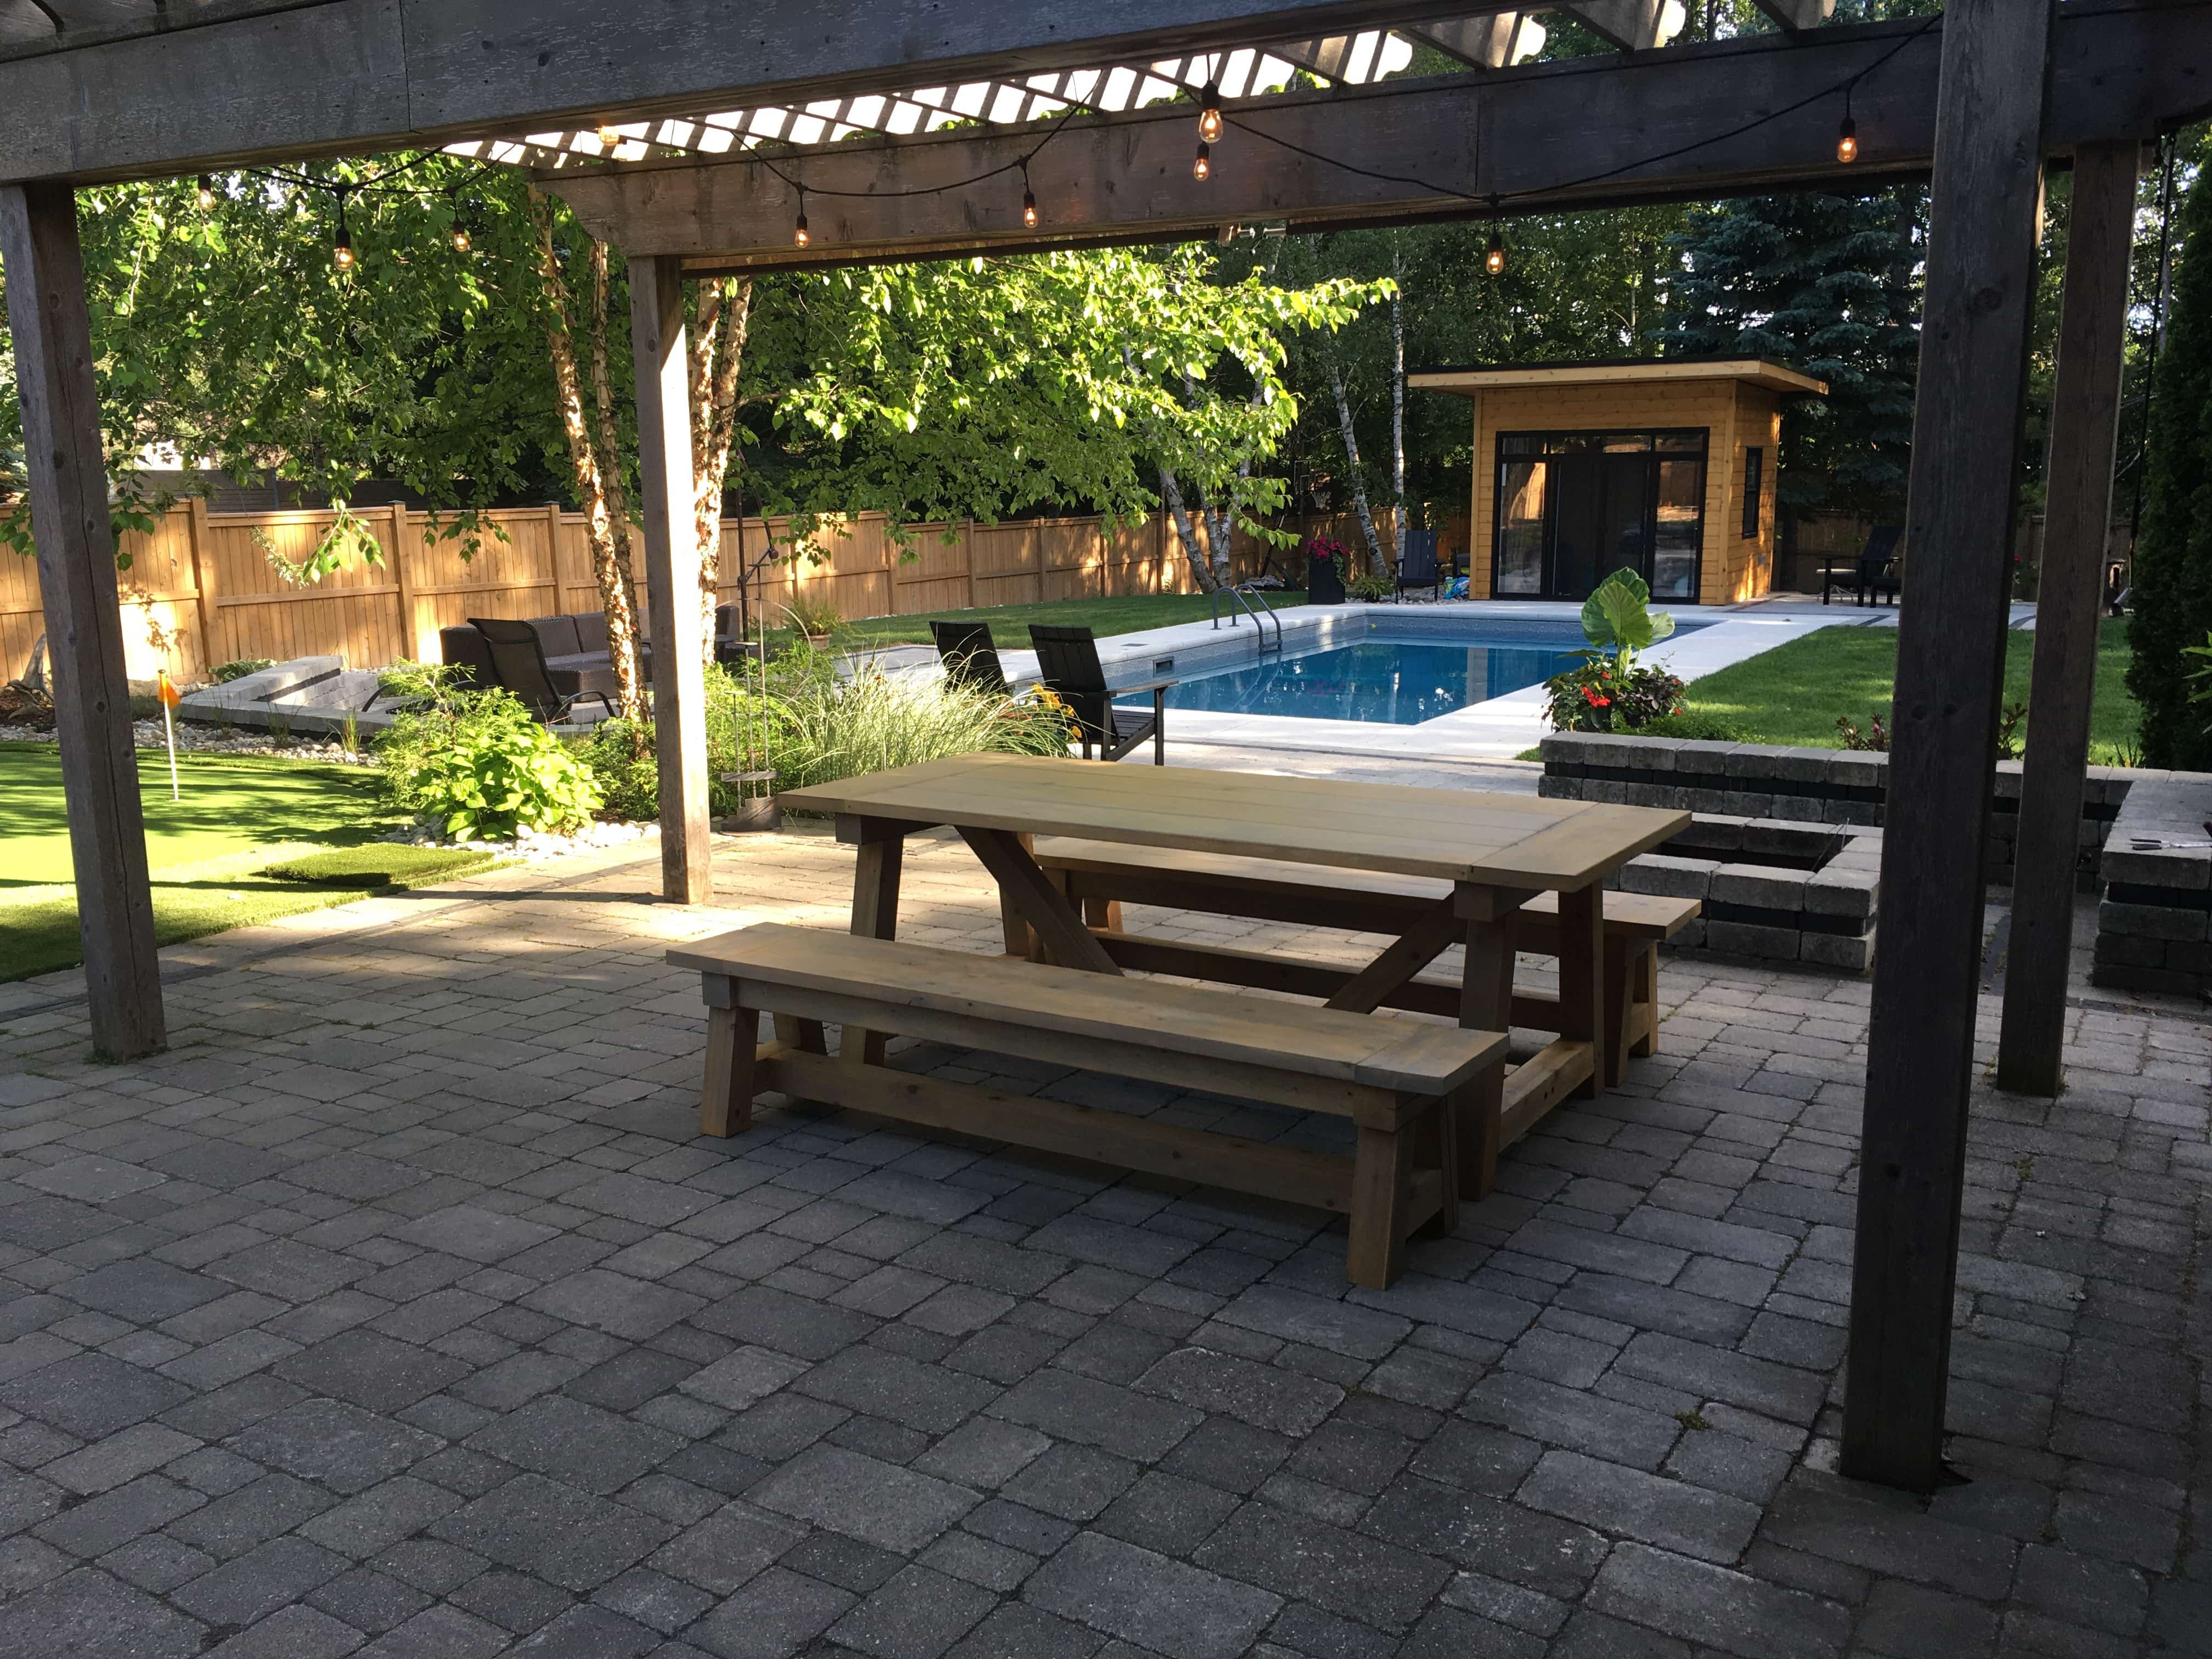 Front view of 9' x 12' Verana Pool Cabana located in London, Ontario – Summerwood Products